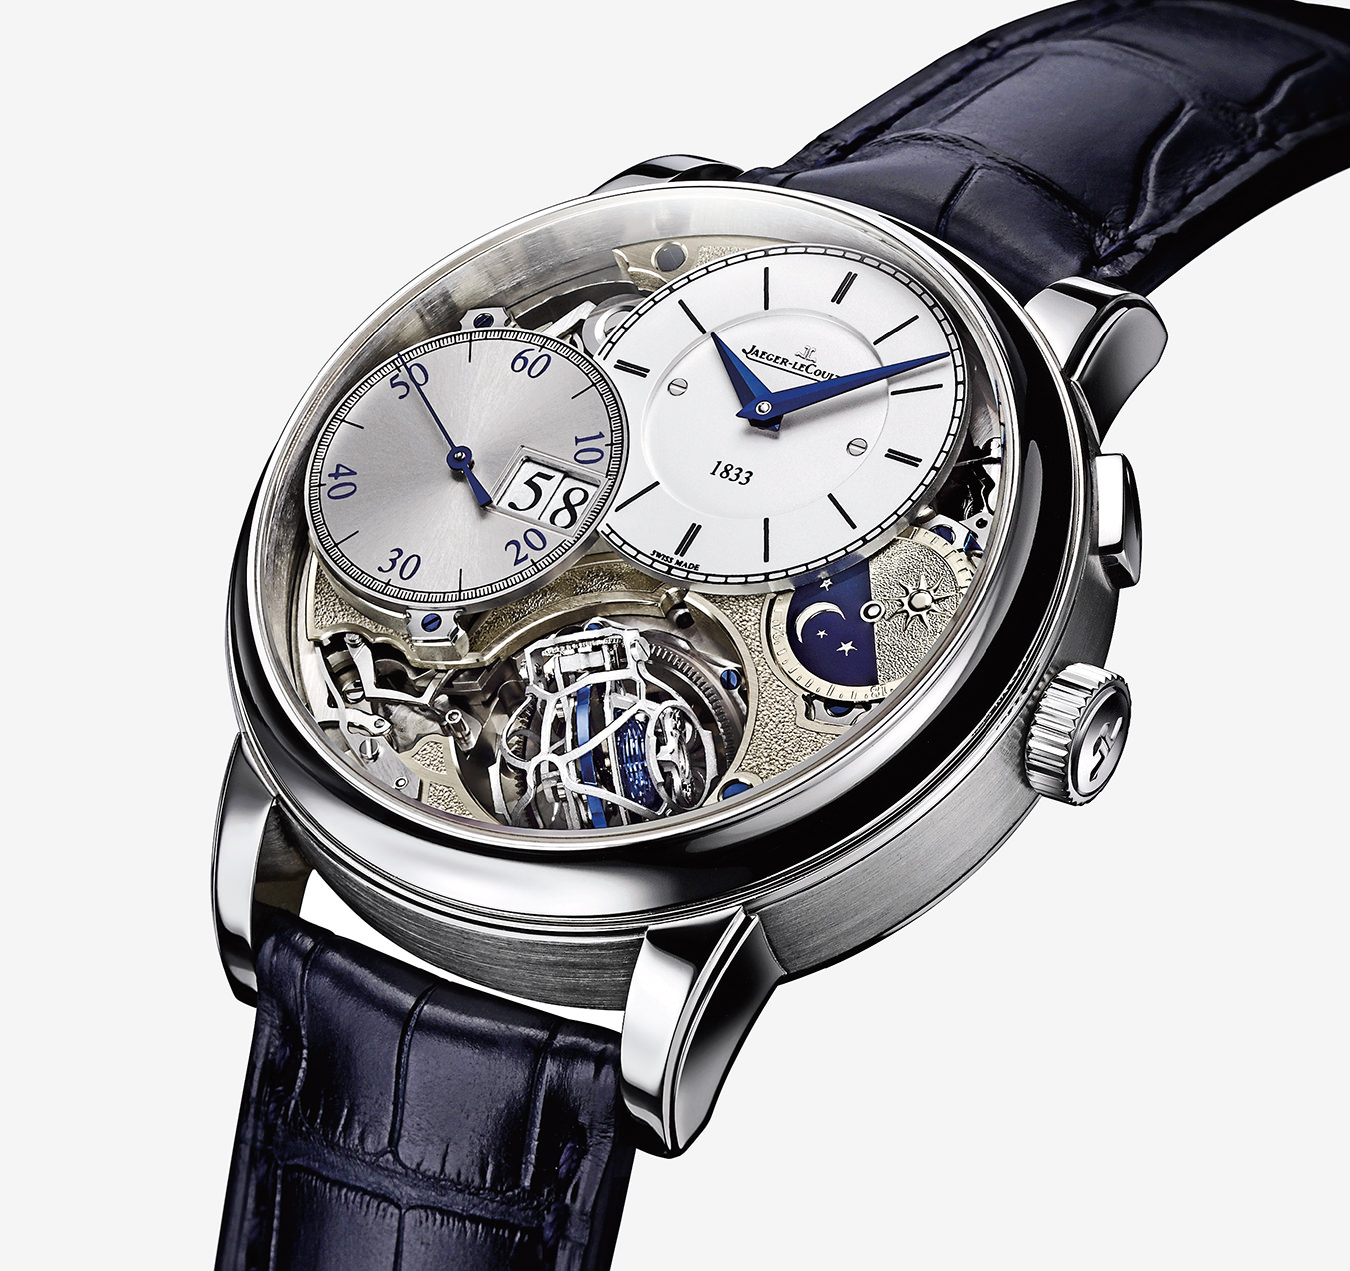 NUVO Magazine Spring 2015: Mastery of Technique; Jaeger-LeCoultre